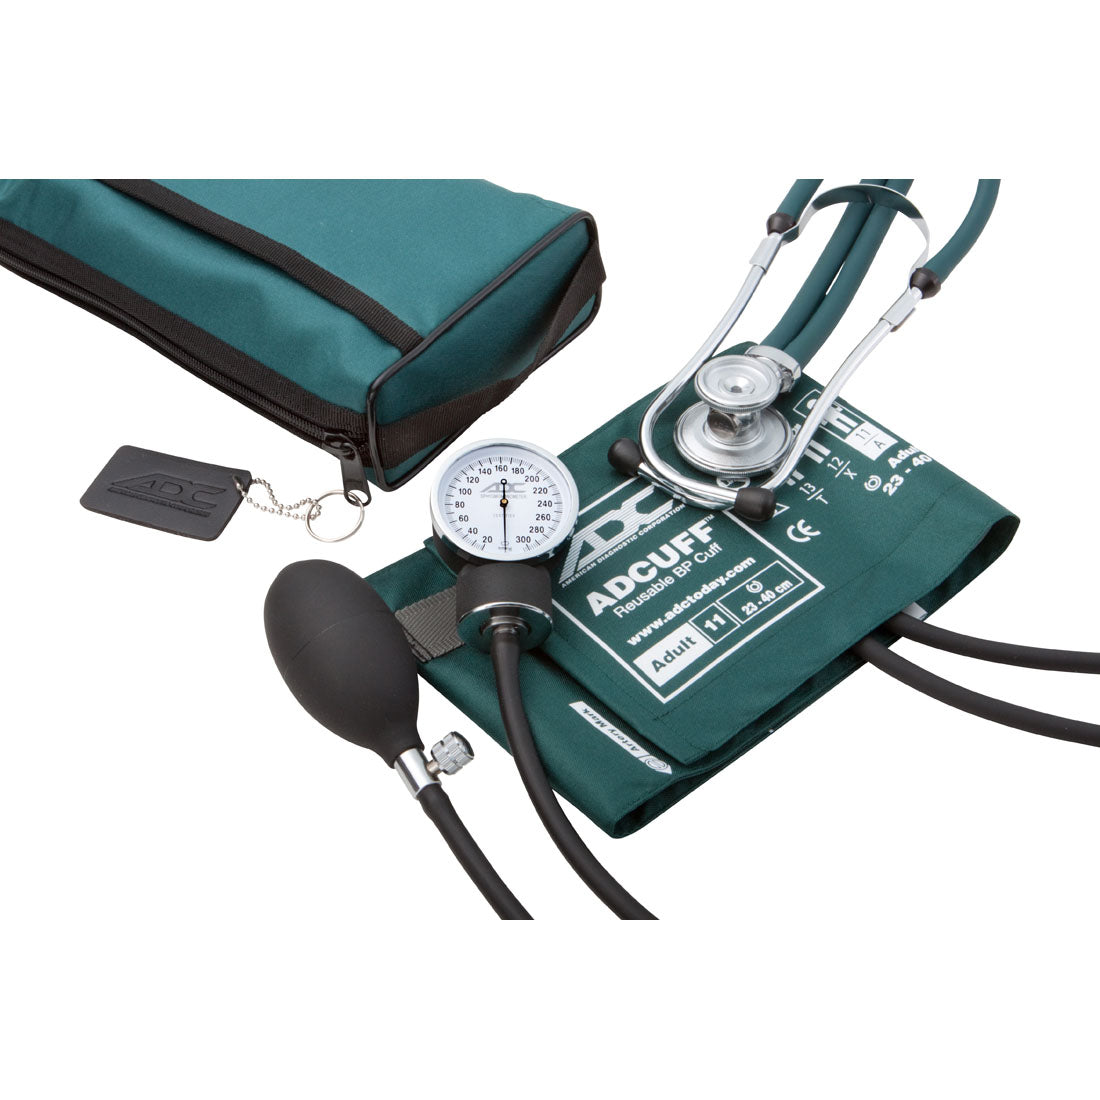 ADC Adult Manual BP Cuff, Stethoscope, and Storage Case (11 Colors)